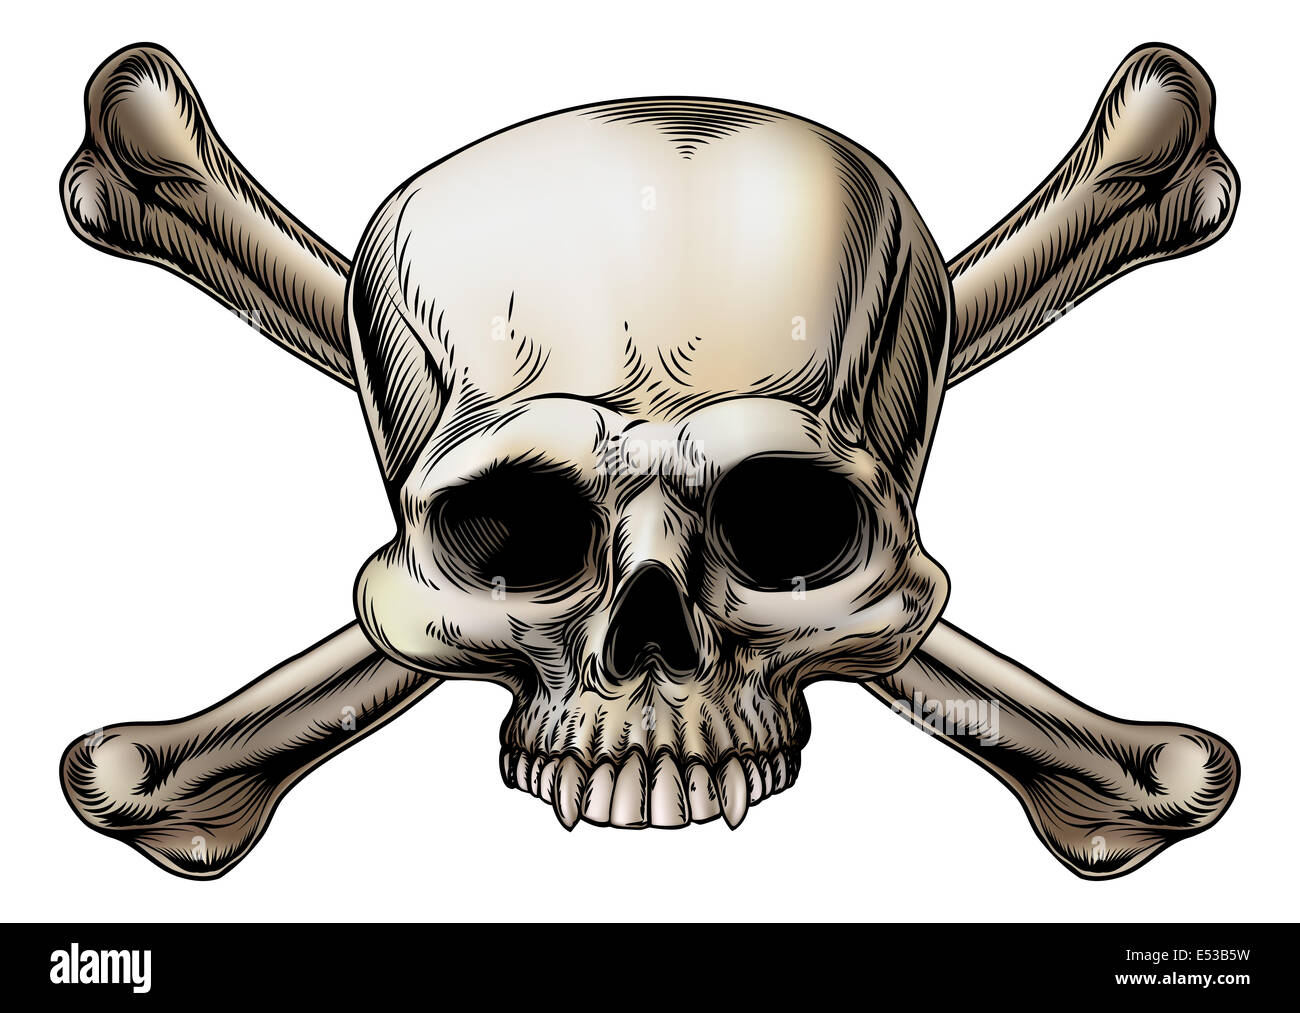 and crossbones drawing with skull in the center of the crossed bones. 